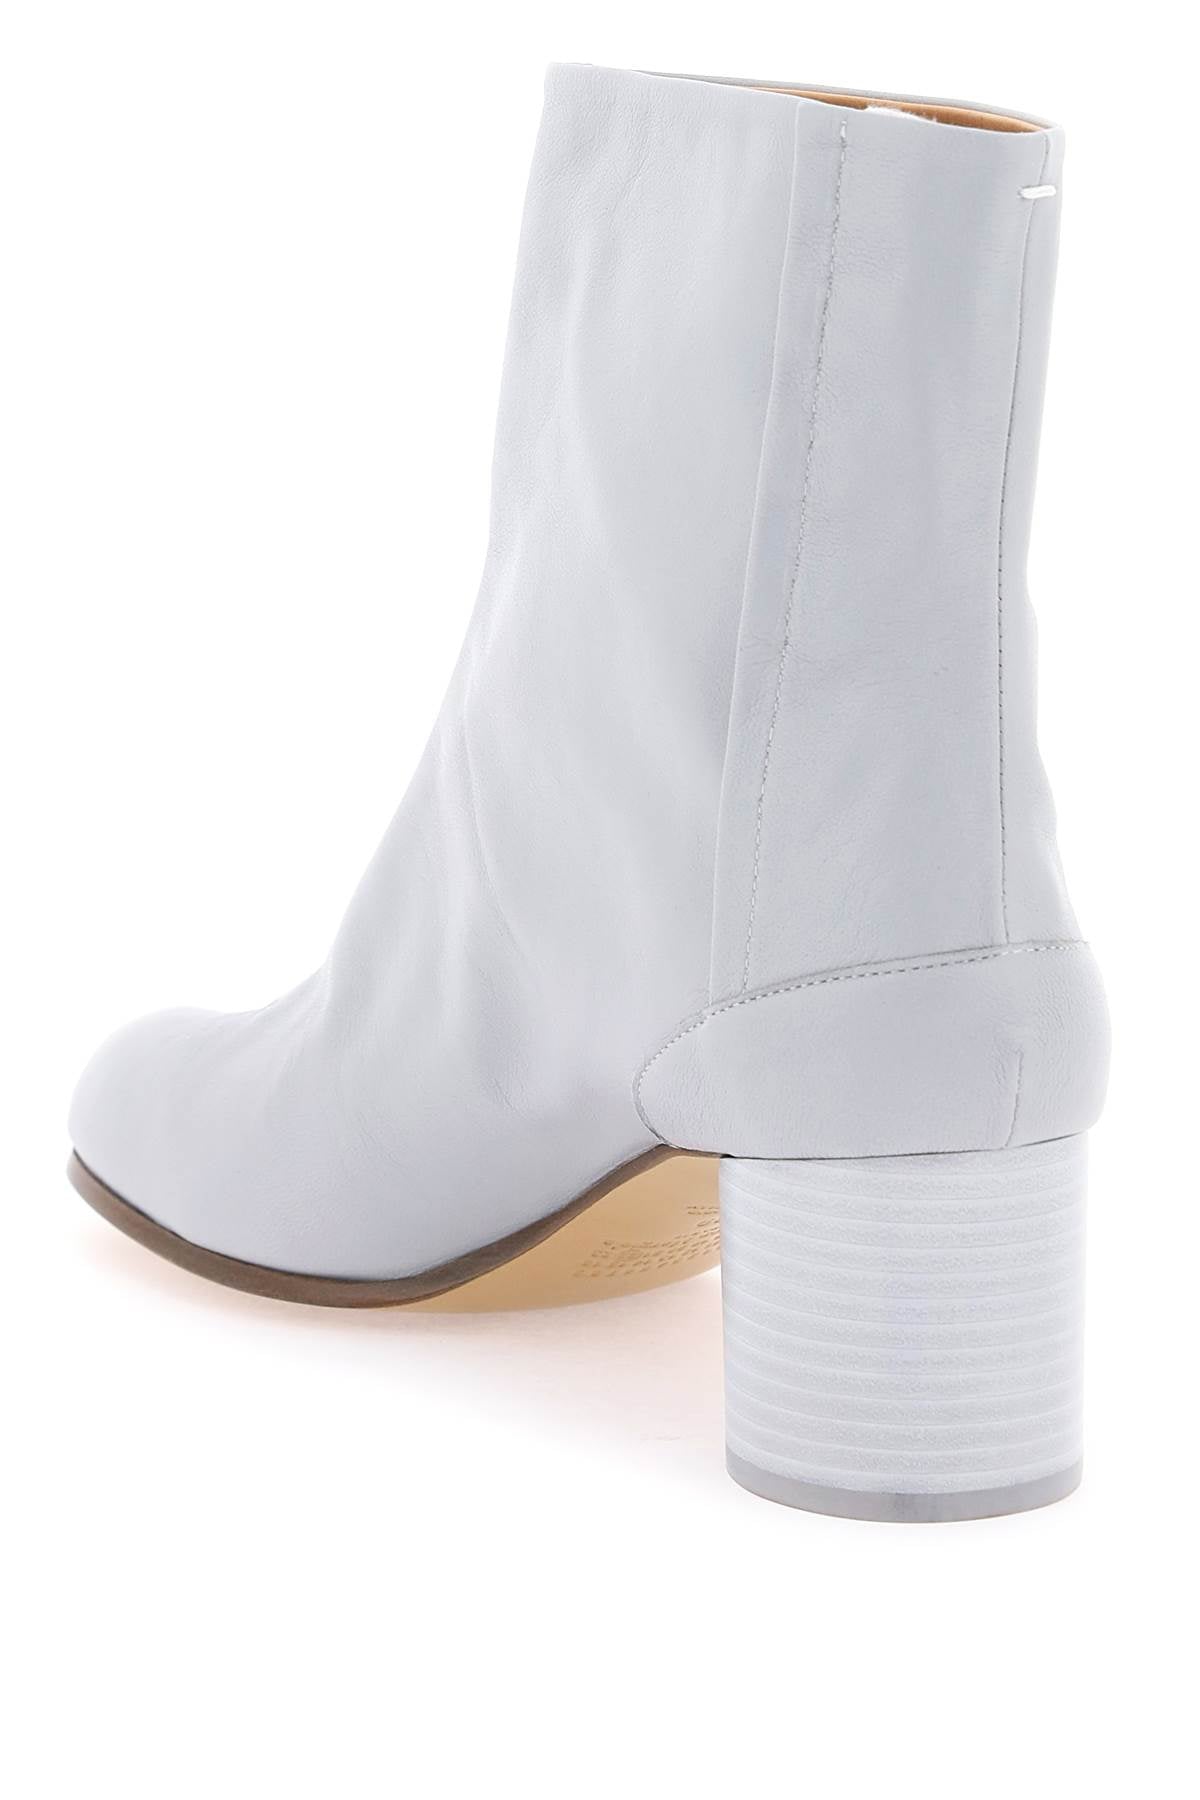 MAISON MARGIELA Multicolor Leather Ankle Boots with Iconic Cut and Distinctive White Stitch